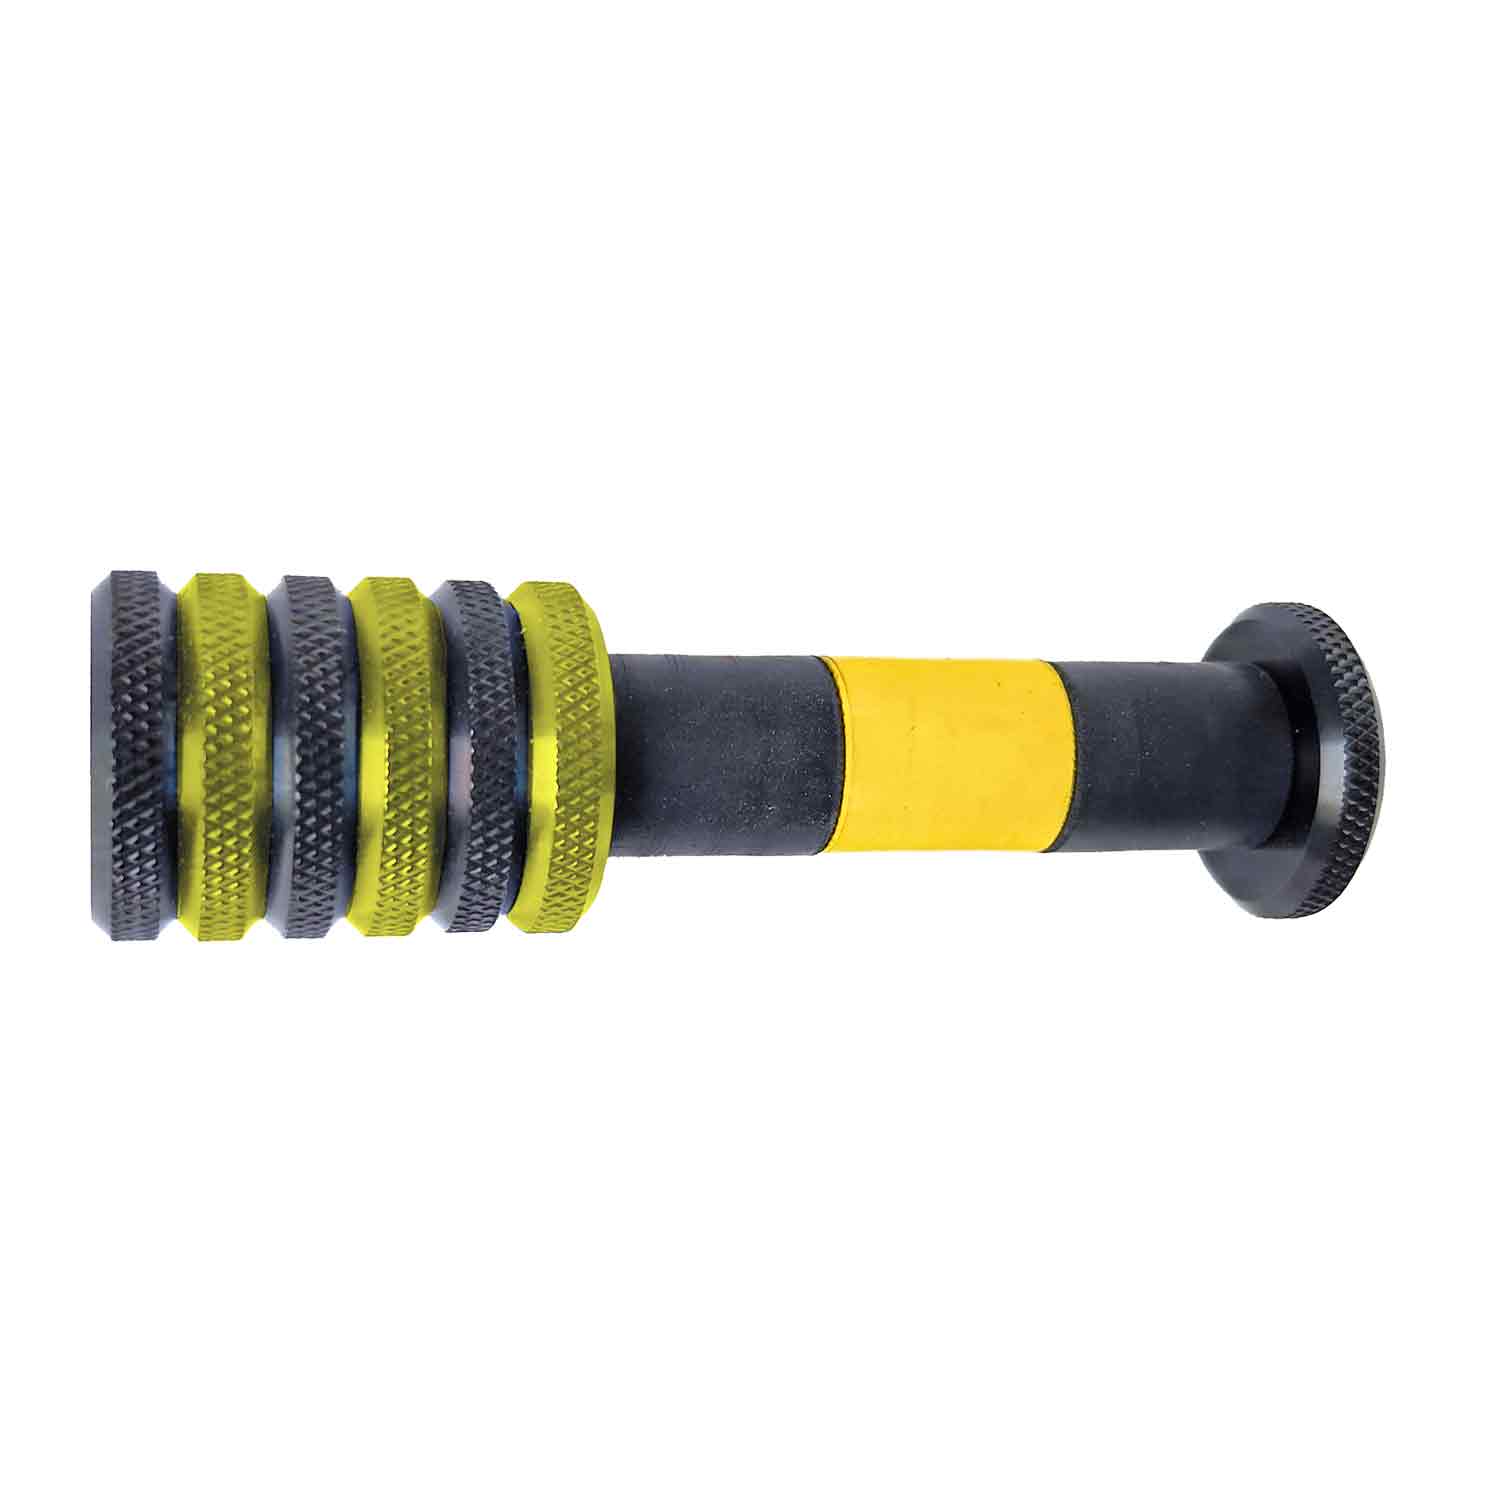 Gillo GF 125mm Tunnel Weight System Gold/Black